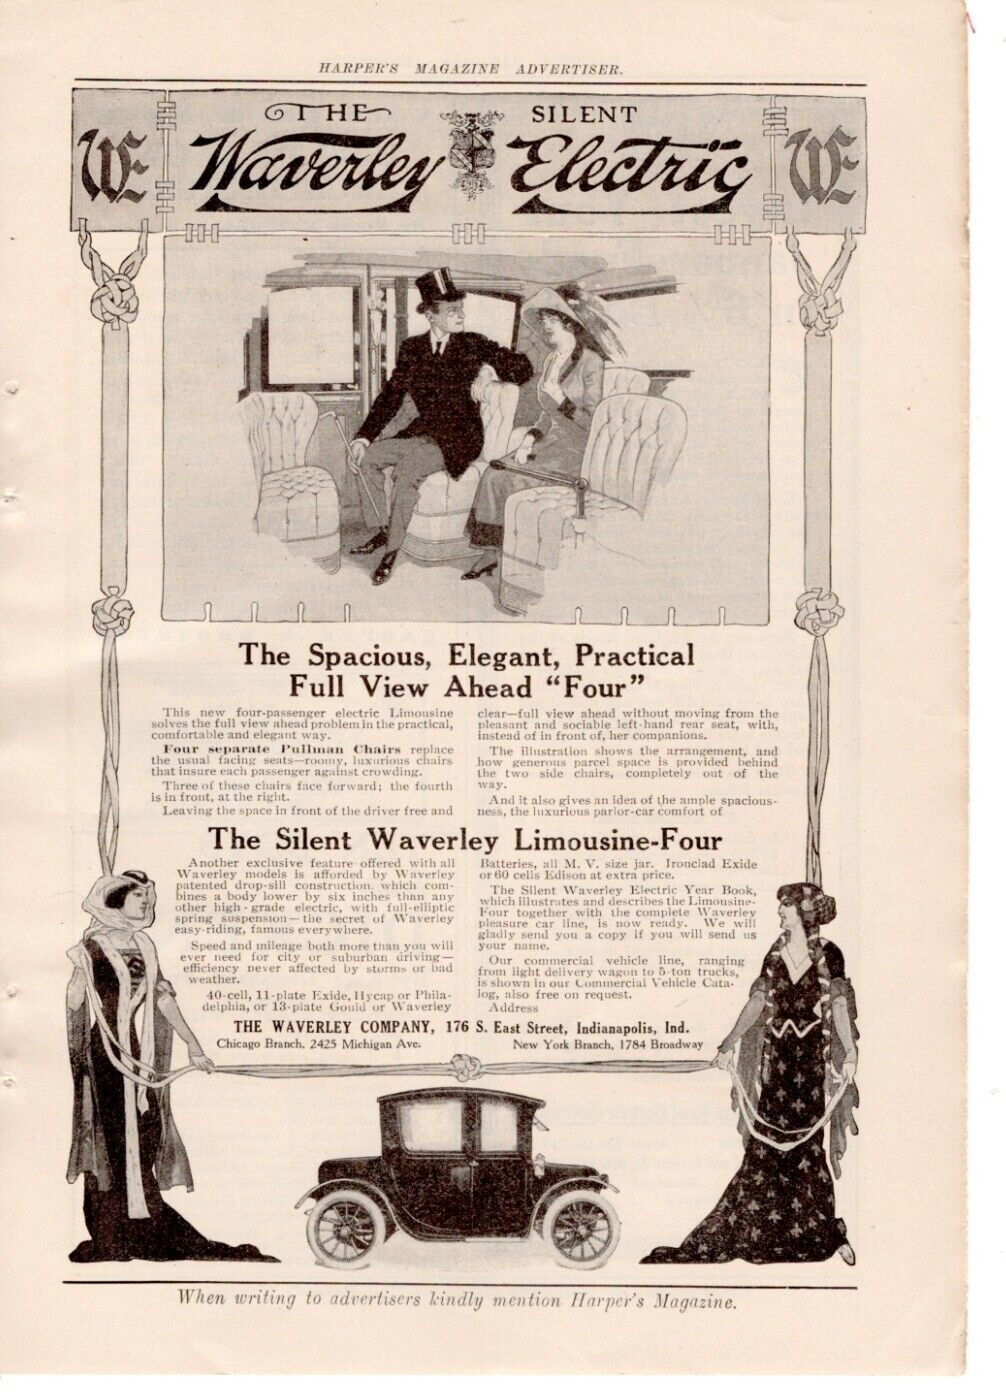 ANTIQUE Print Ad ELECTRIC CAR LIMOUSINE The Silent Waverly Four Full View 1913 